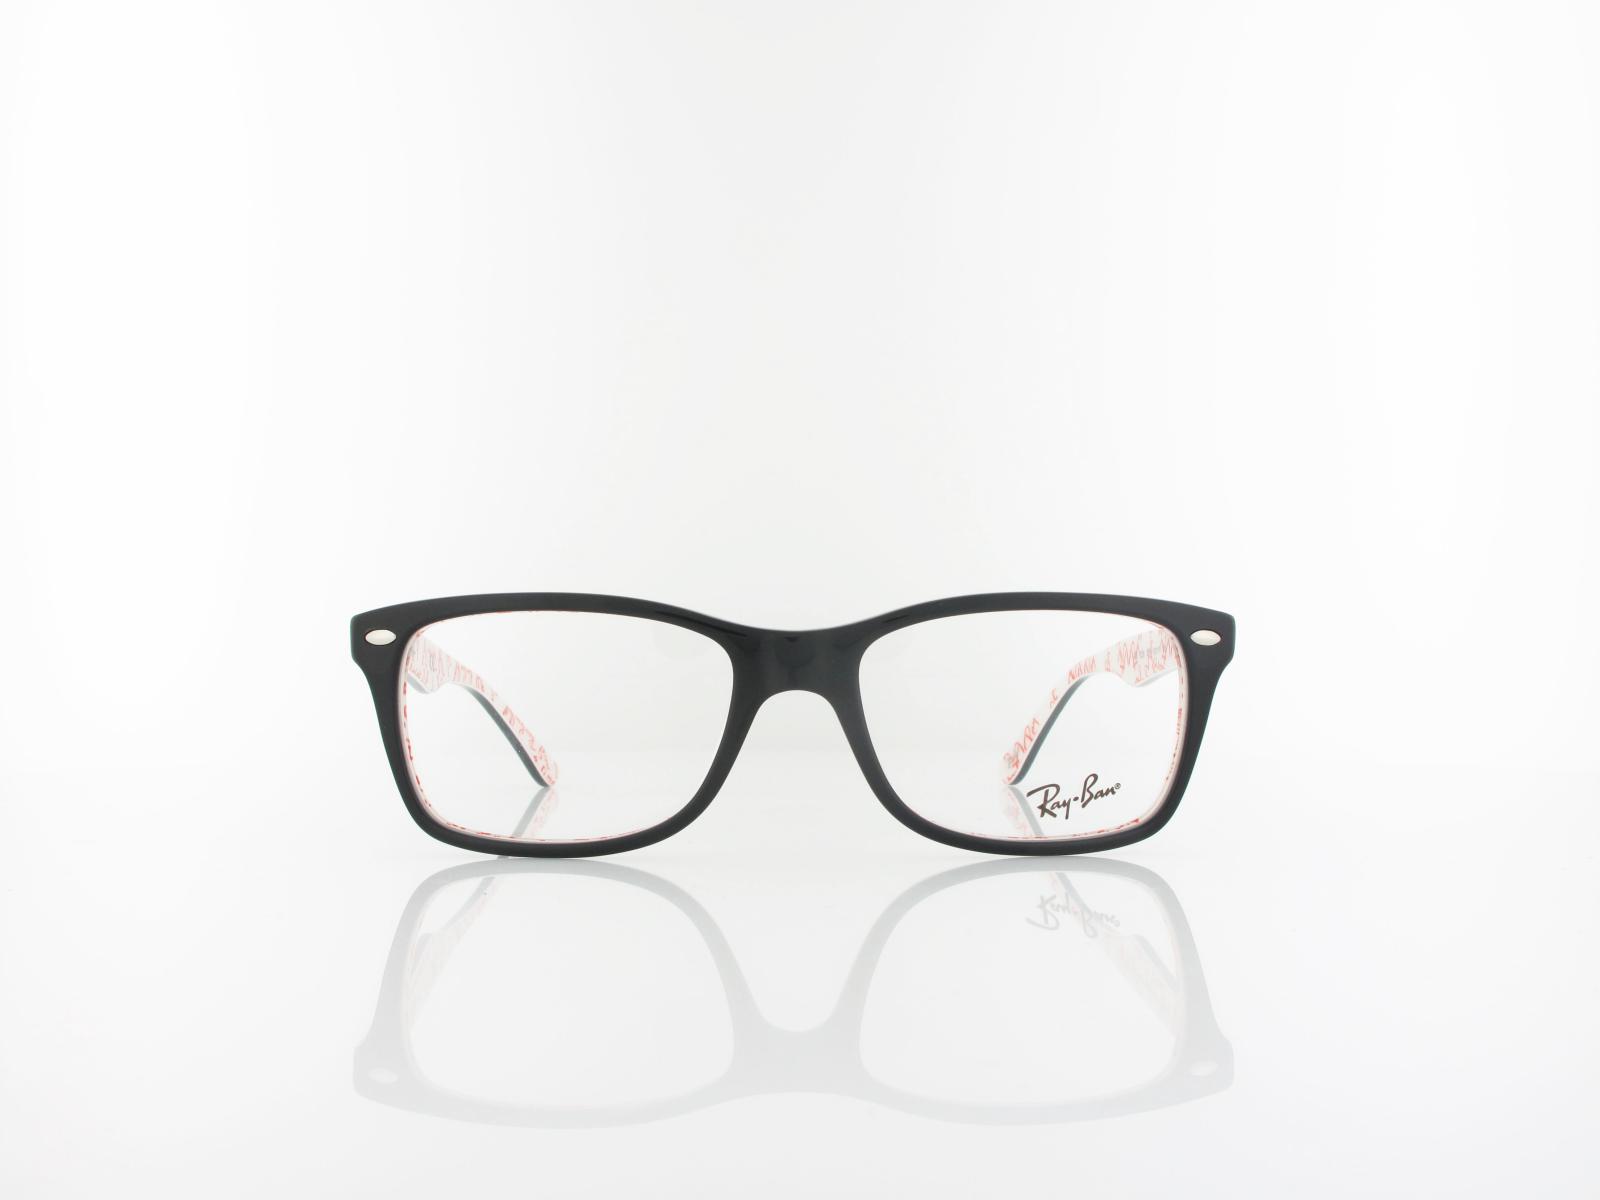 Ray Ban | RX5228 5014 53 | top black on texture white